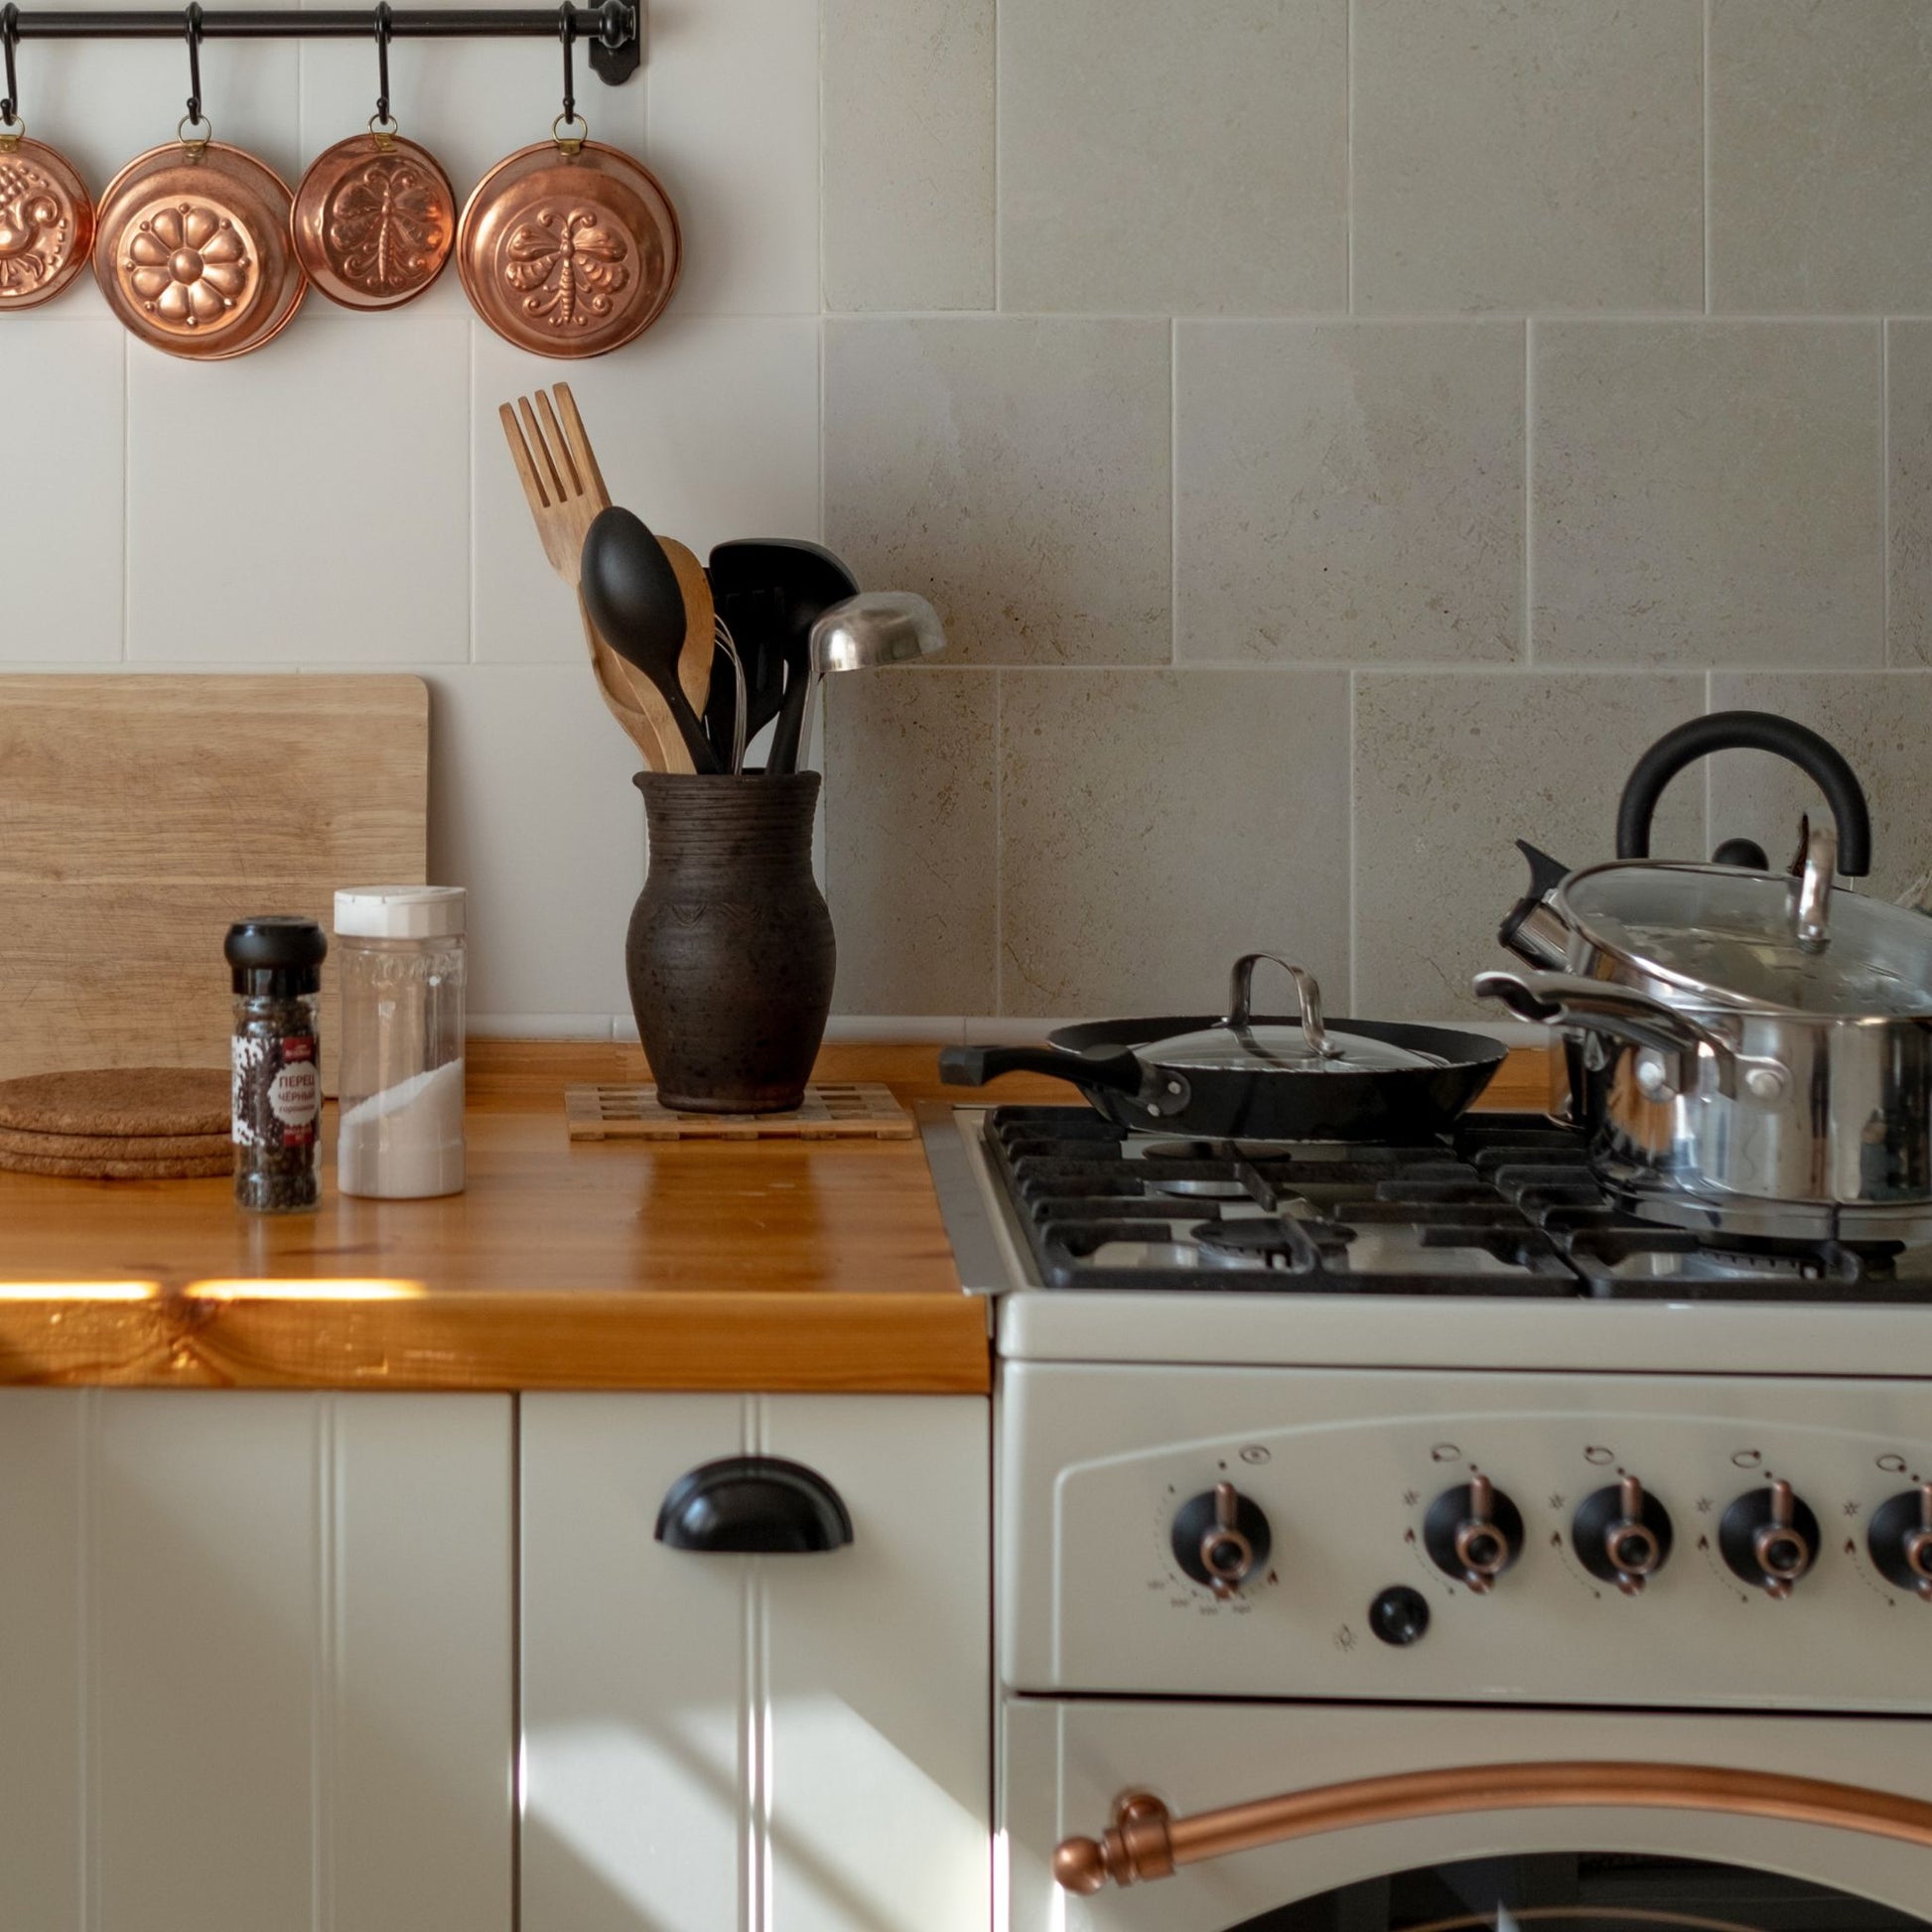 A tiled splashback behind an oven in a country kitchen. The splashback is made up of medium plain cream marble tiles.